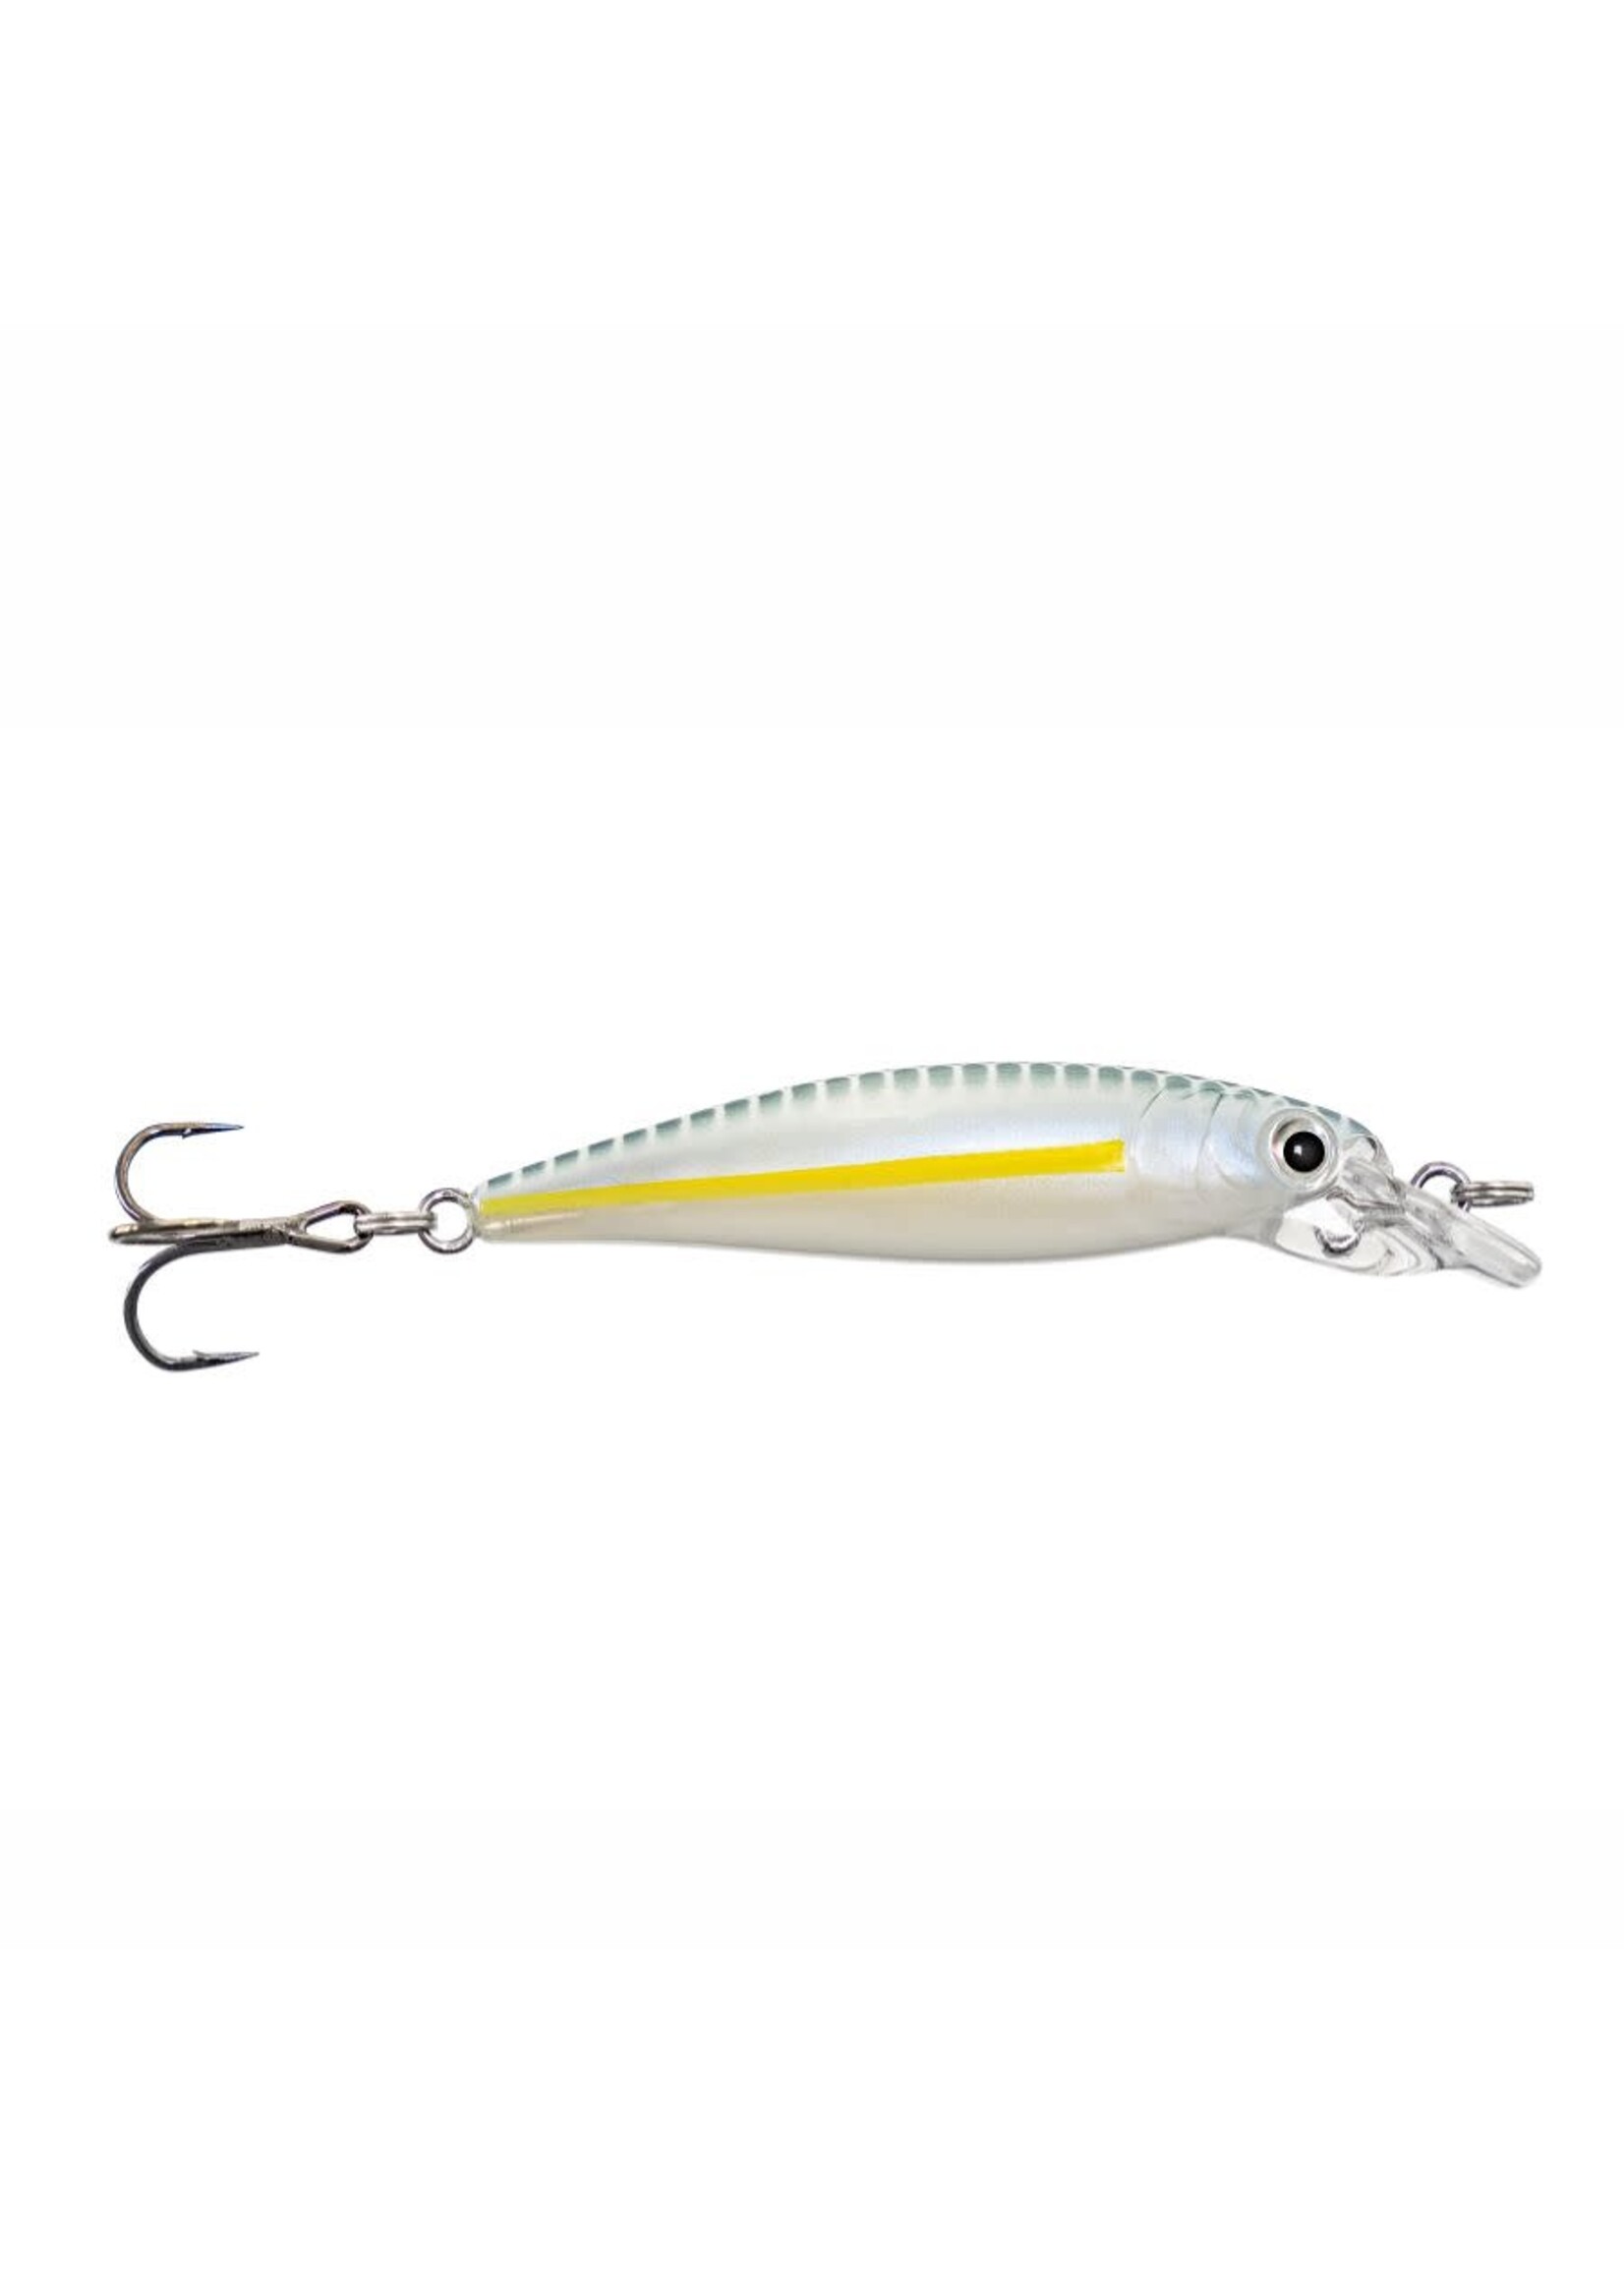 Buy Dynamic Lures HD XXL Fishing Lure, 4.75 Inch 0.75 Oz, Features Custom  Weight System Technology, (2) - Size 10 Treble Hooks, For Bass, Trout,  Walleye, Carp, Count 1